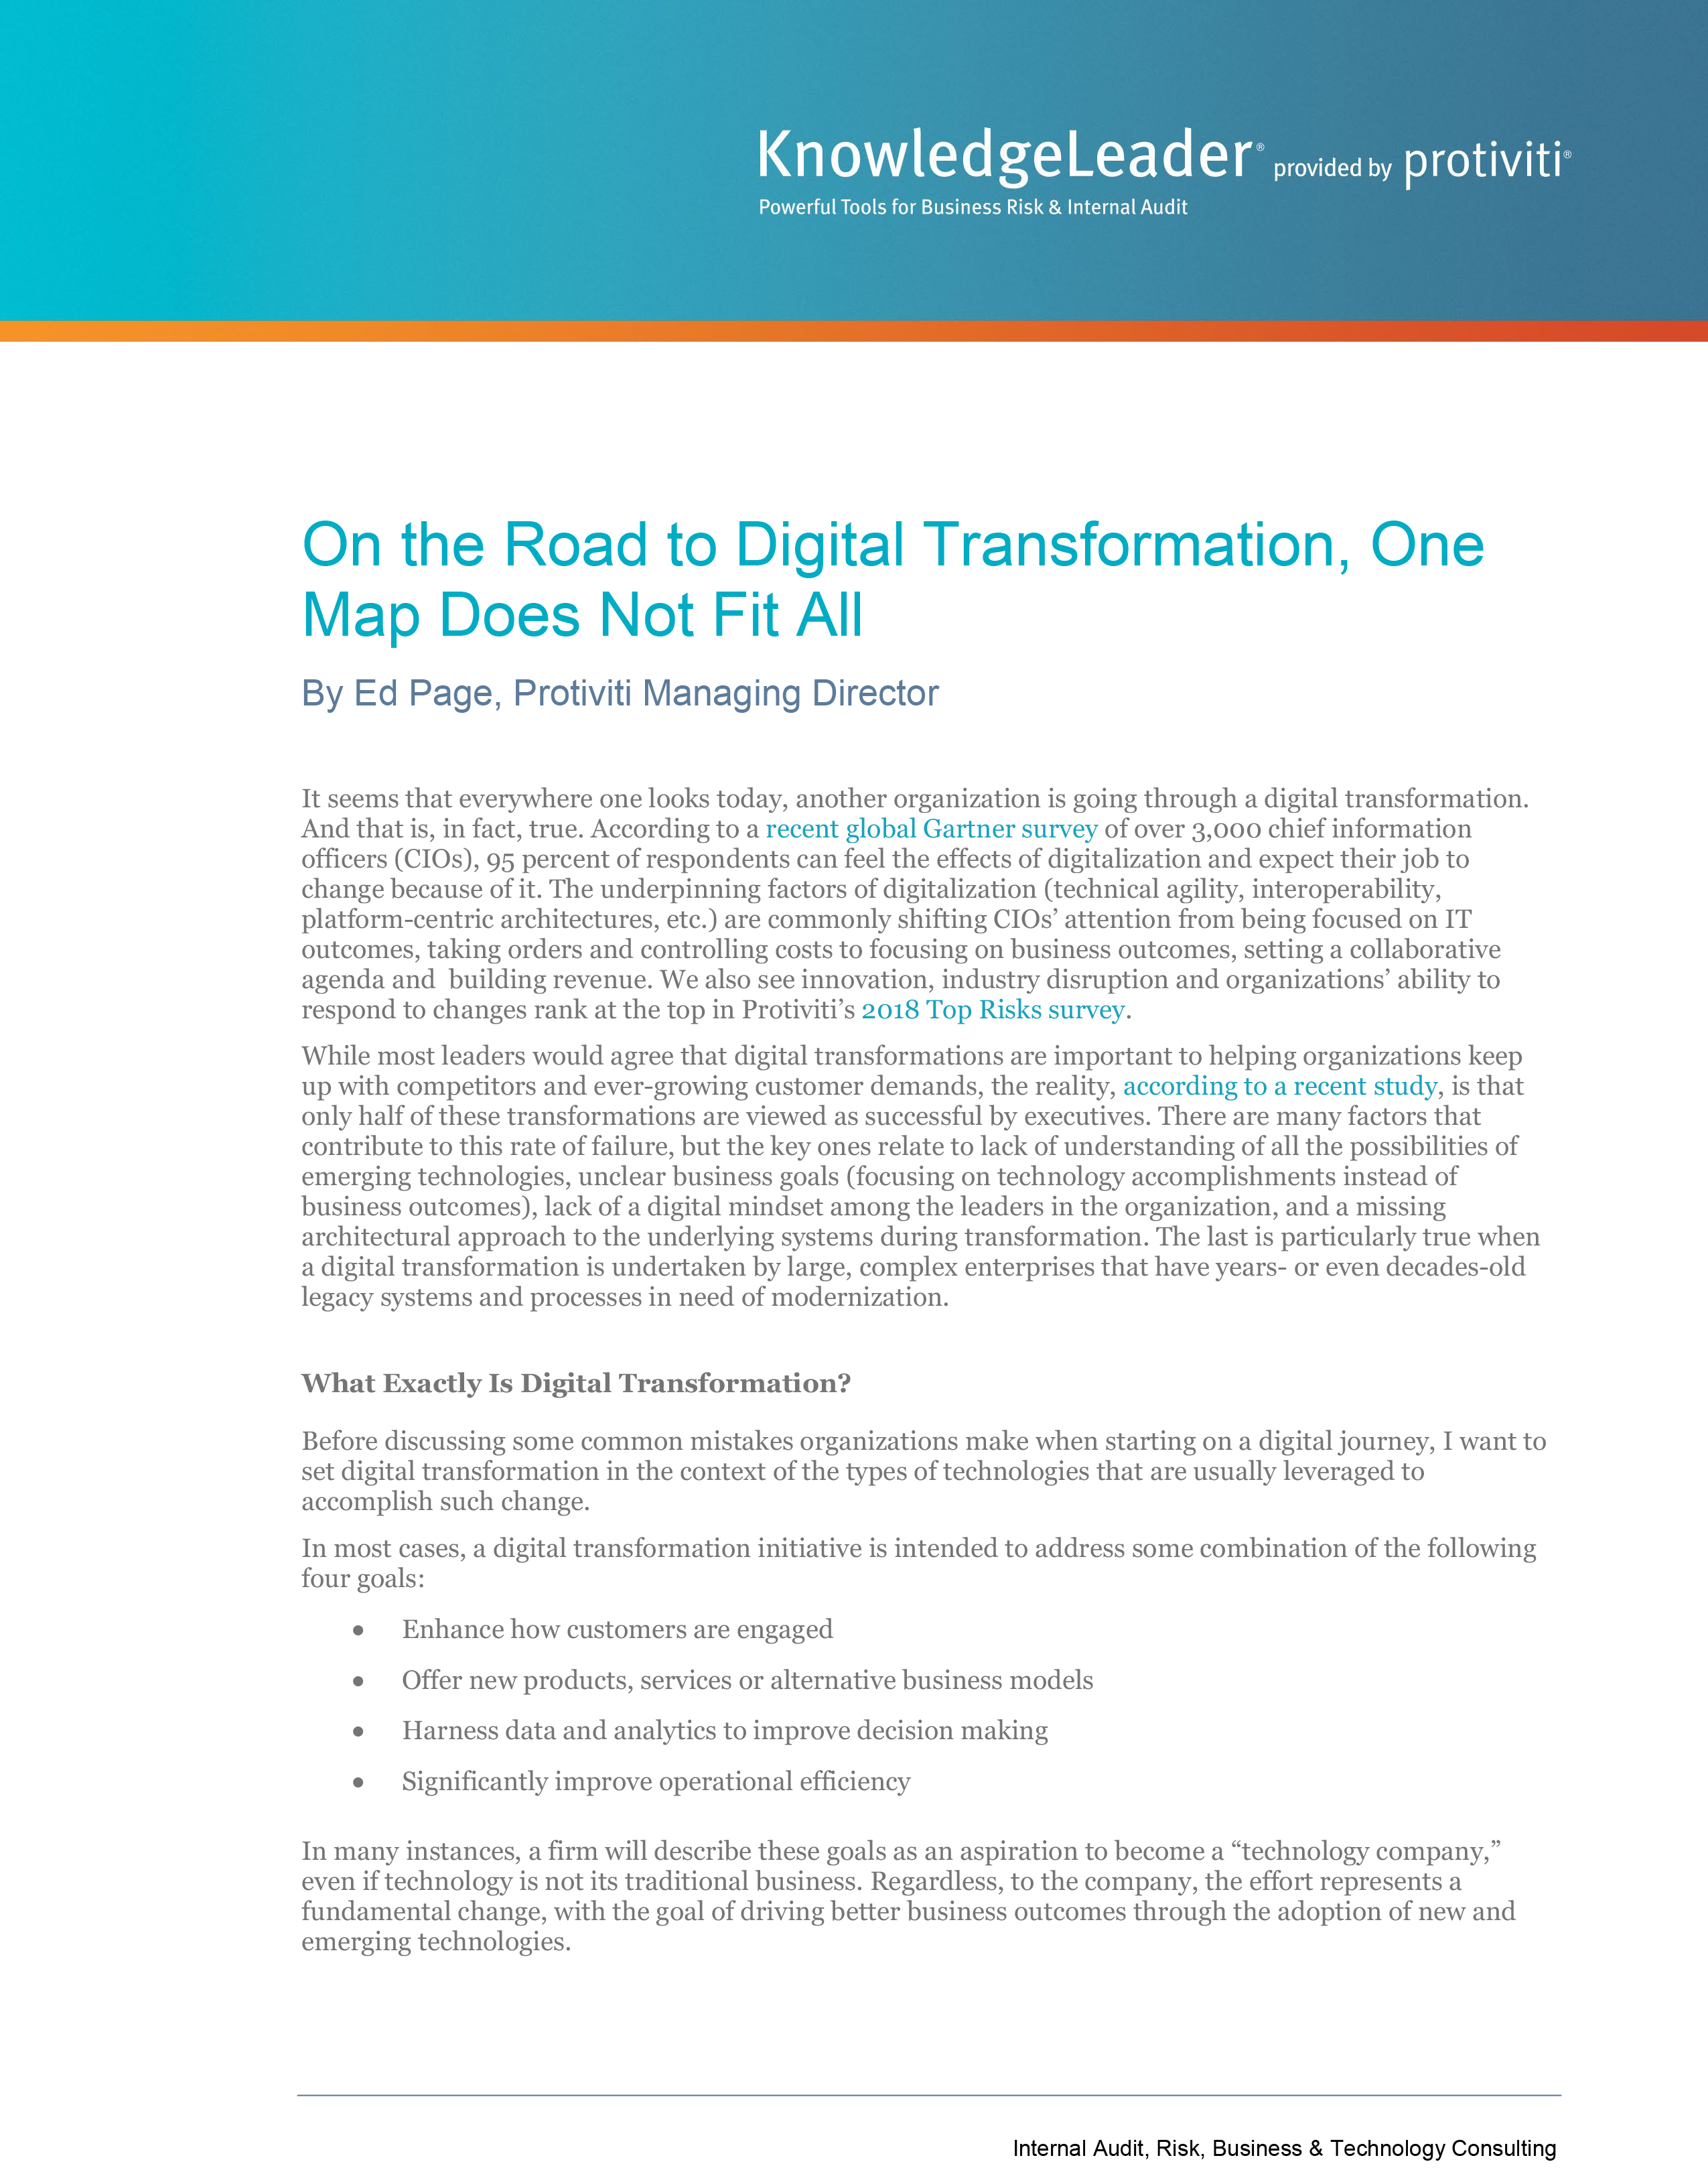 Screenshot of the first page of On the Road to Digital Transformation,One Map Does Not Fit